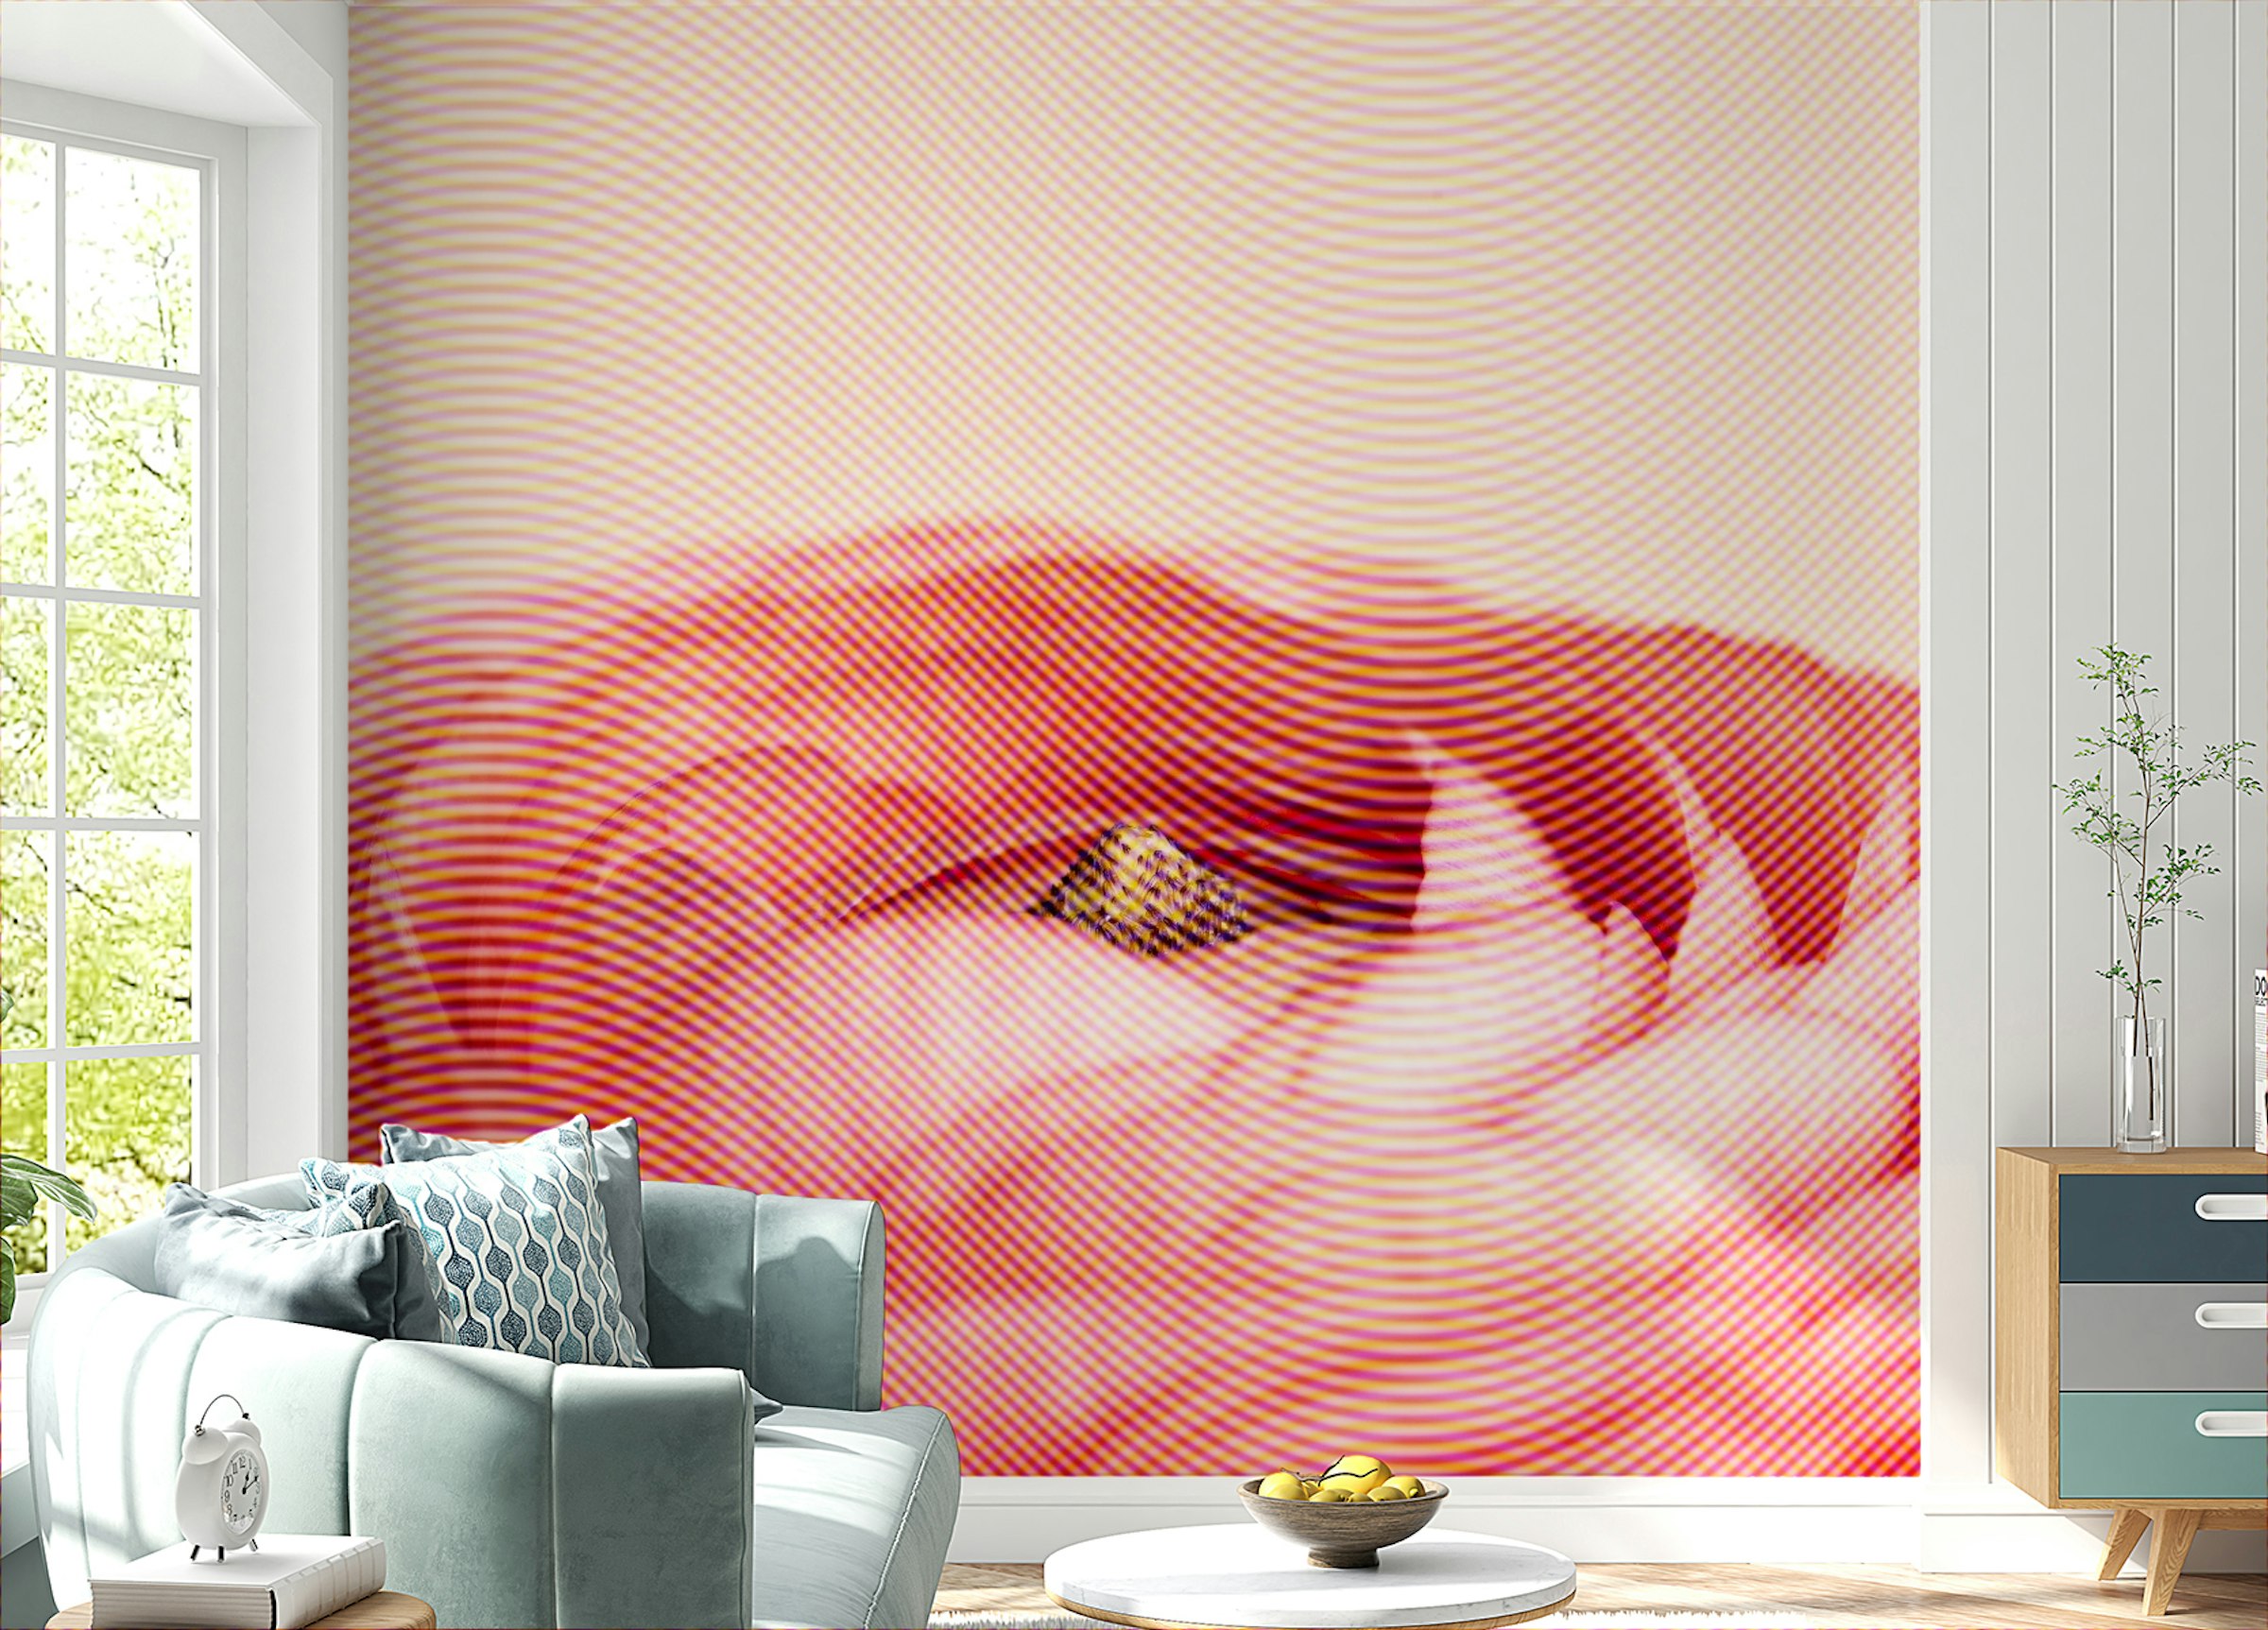 Peel and Stick Artistic Red Rose Flower Wallpaper Wall Mural